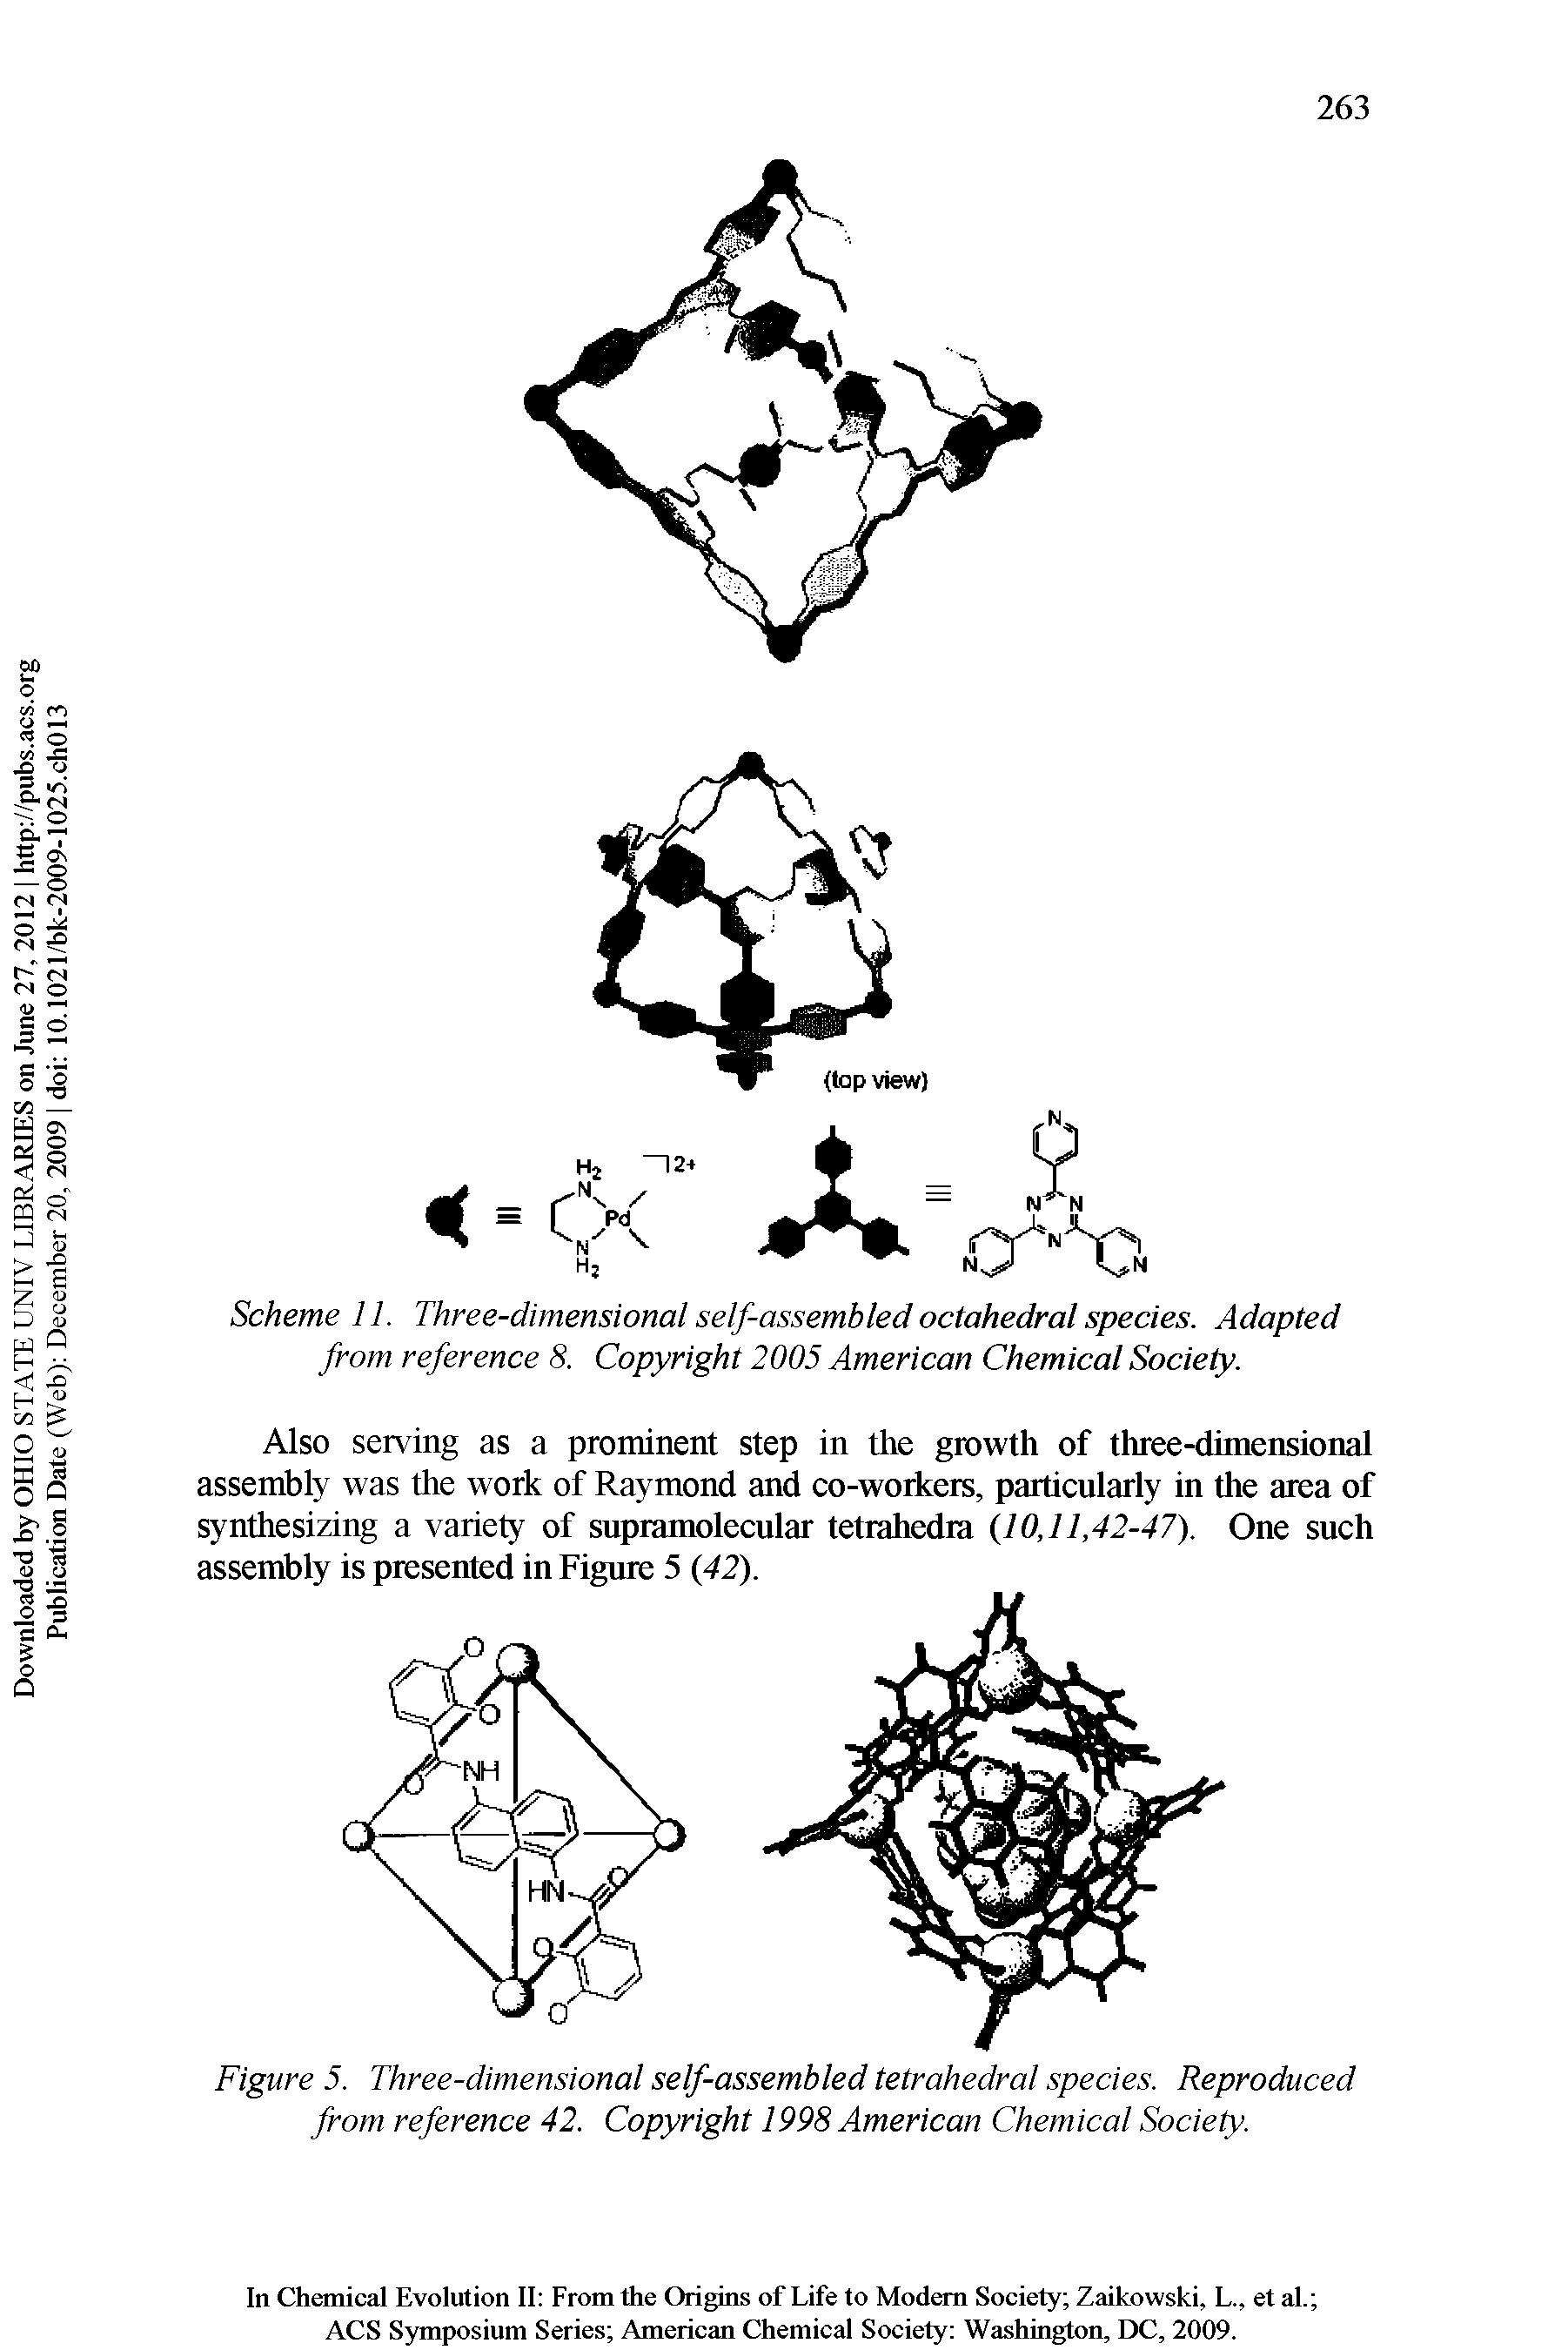 Figure 5. Three-dimensional self-assembled tetrahedral species. Reproduced from reference 42. Copyright 1998 American Chemical Society.